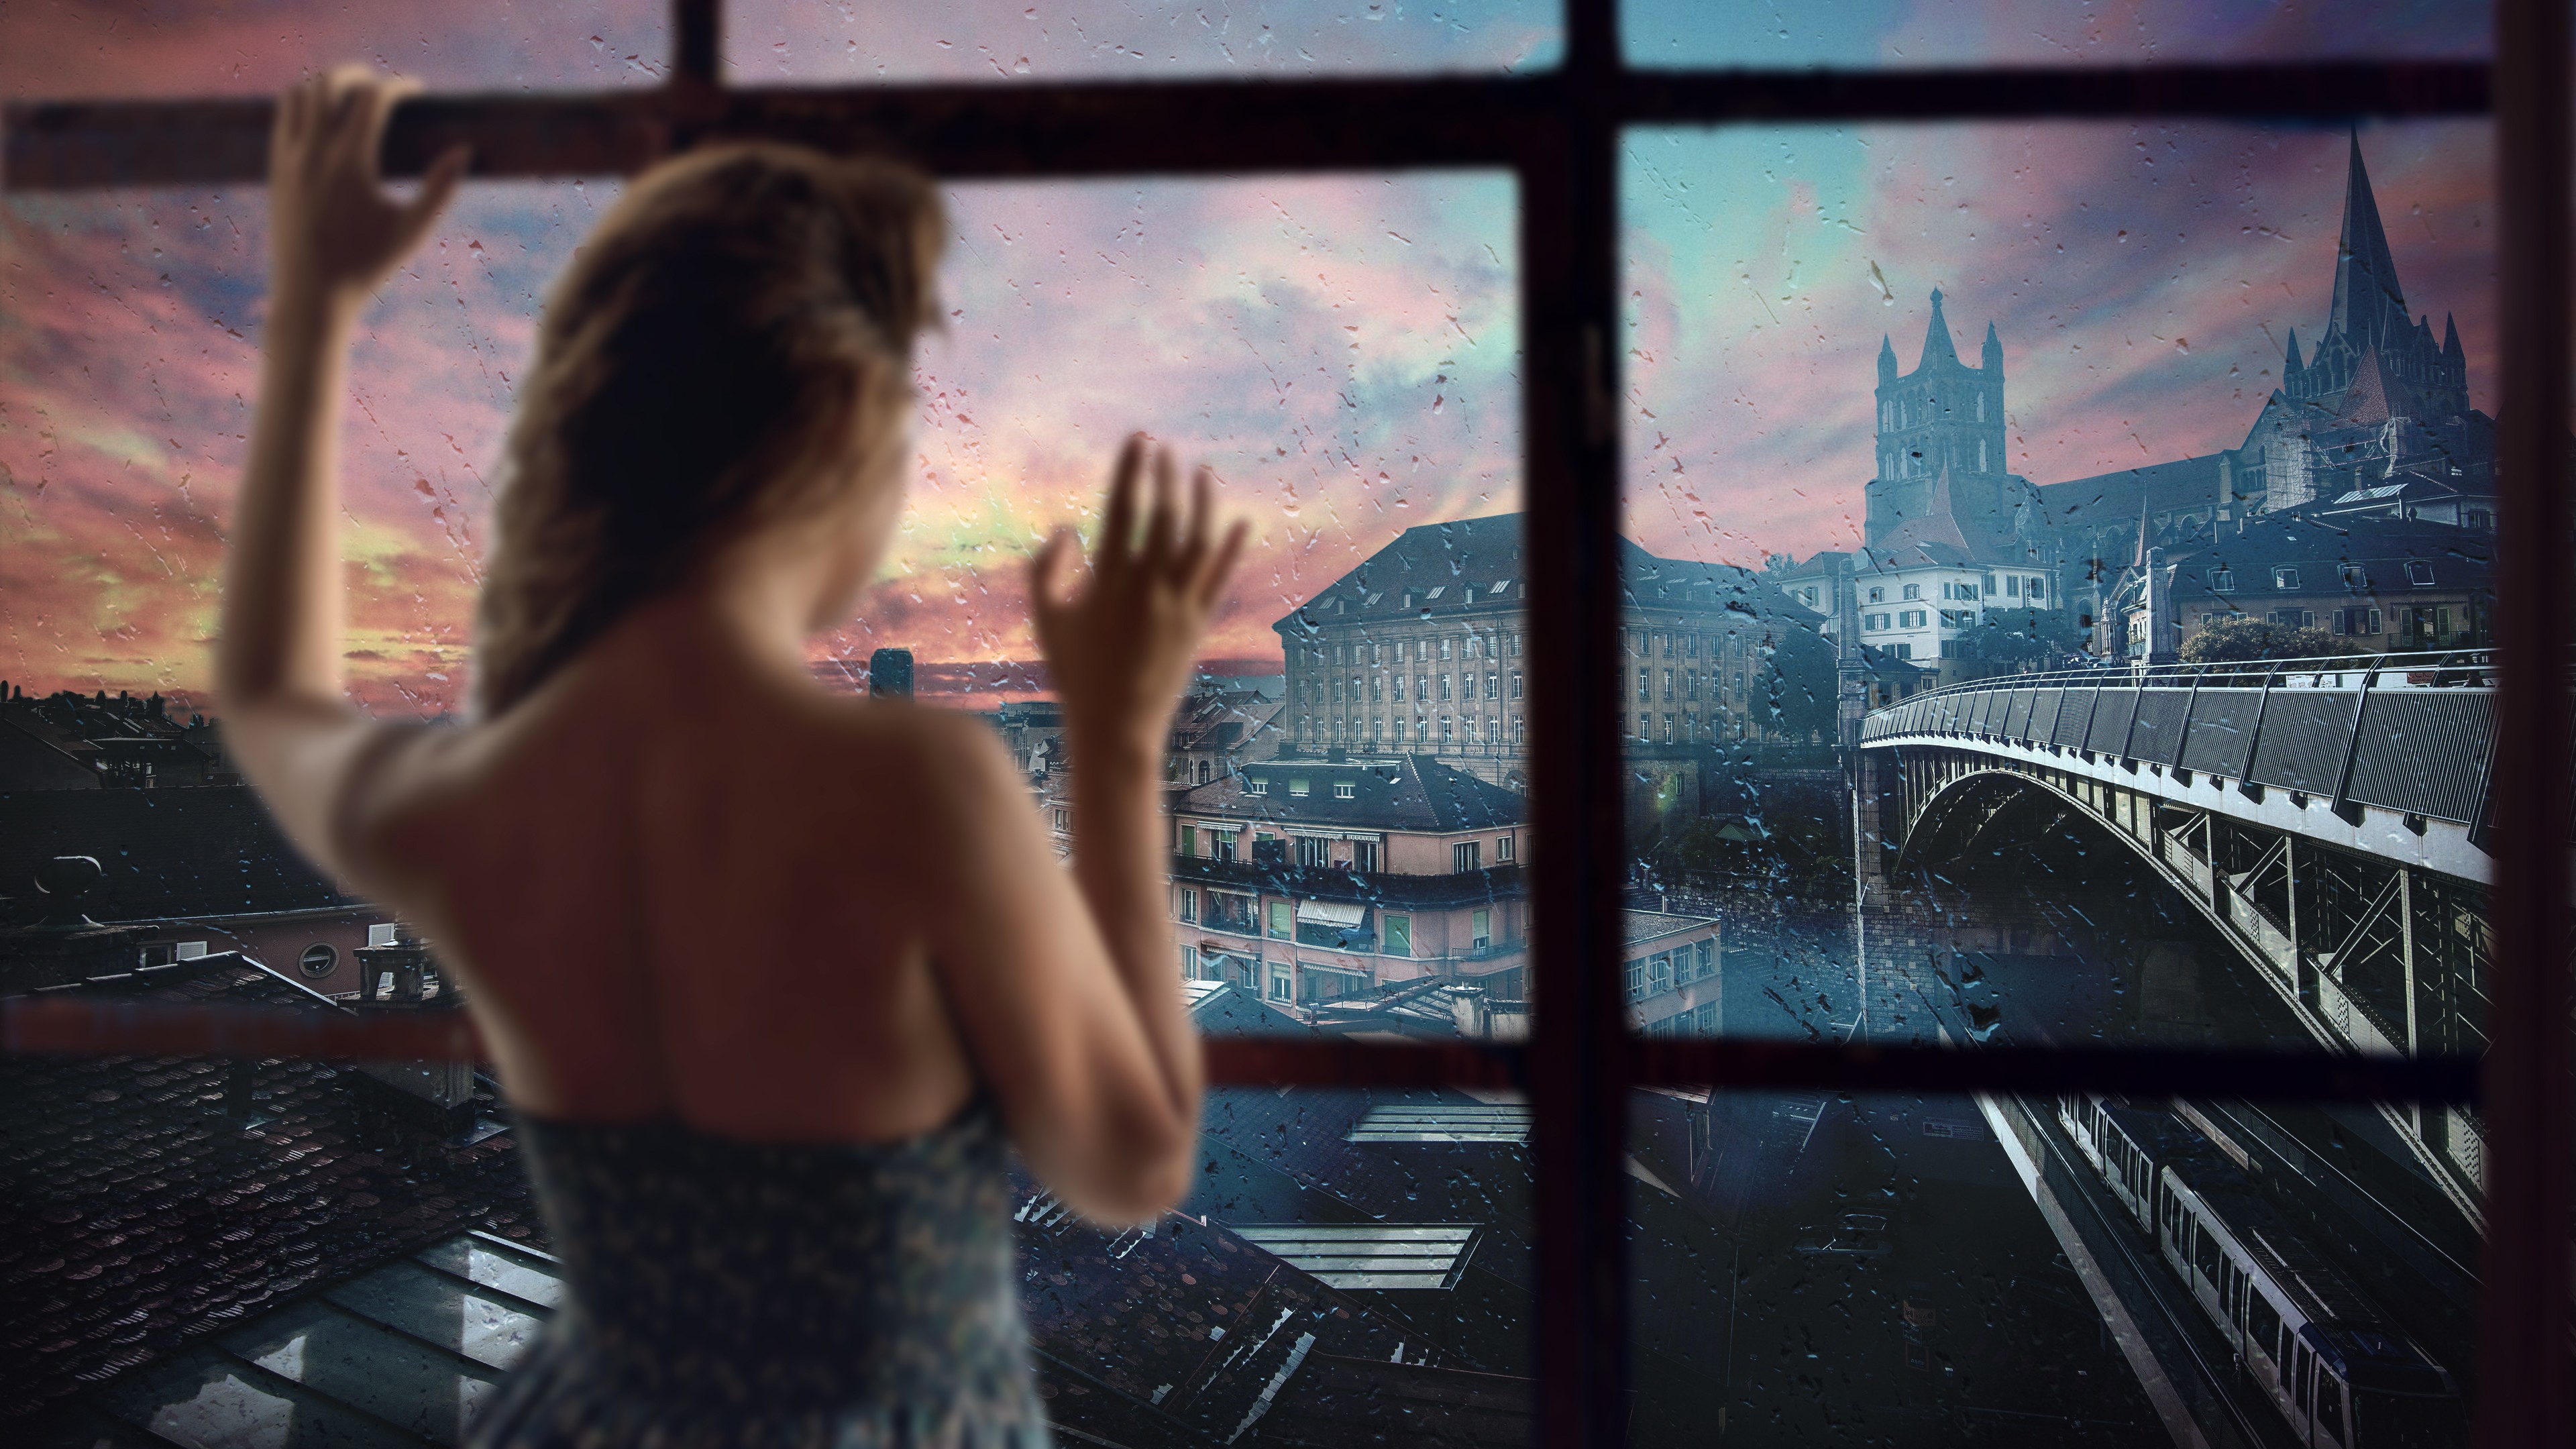 General 3840x2160 rain sunset skyline window city women looking out window cityscape arms up women indoors water on glass